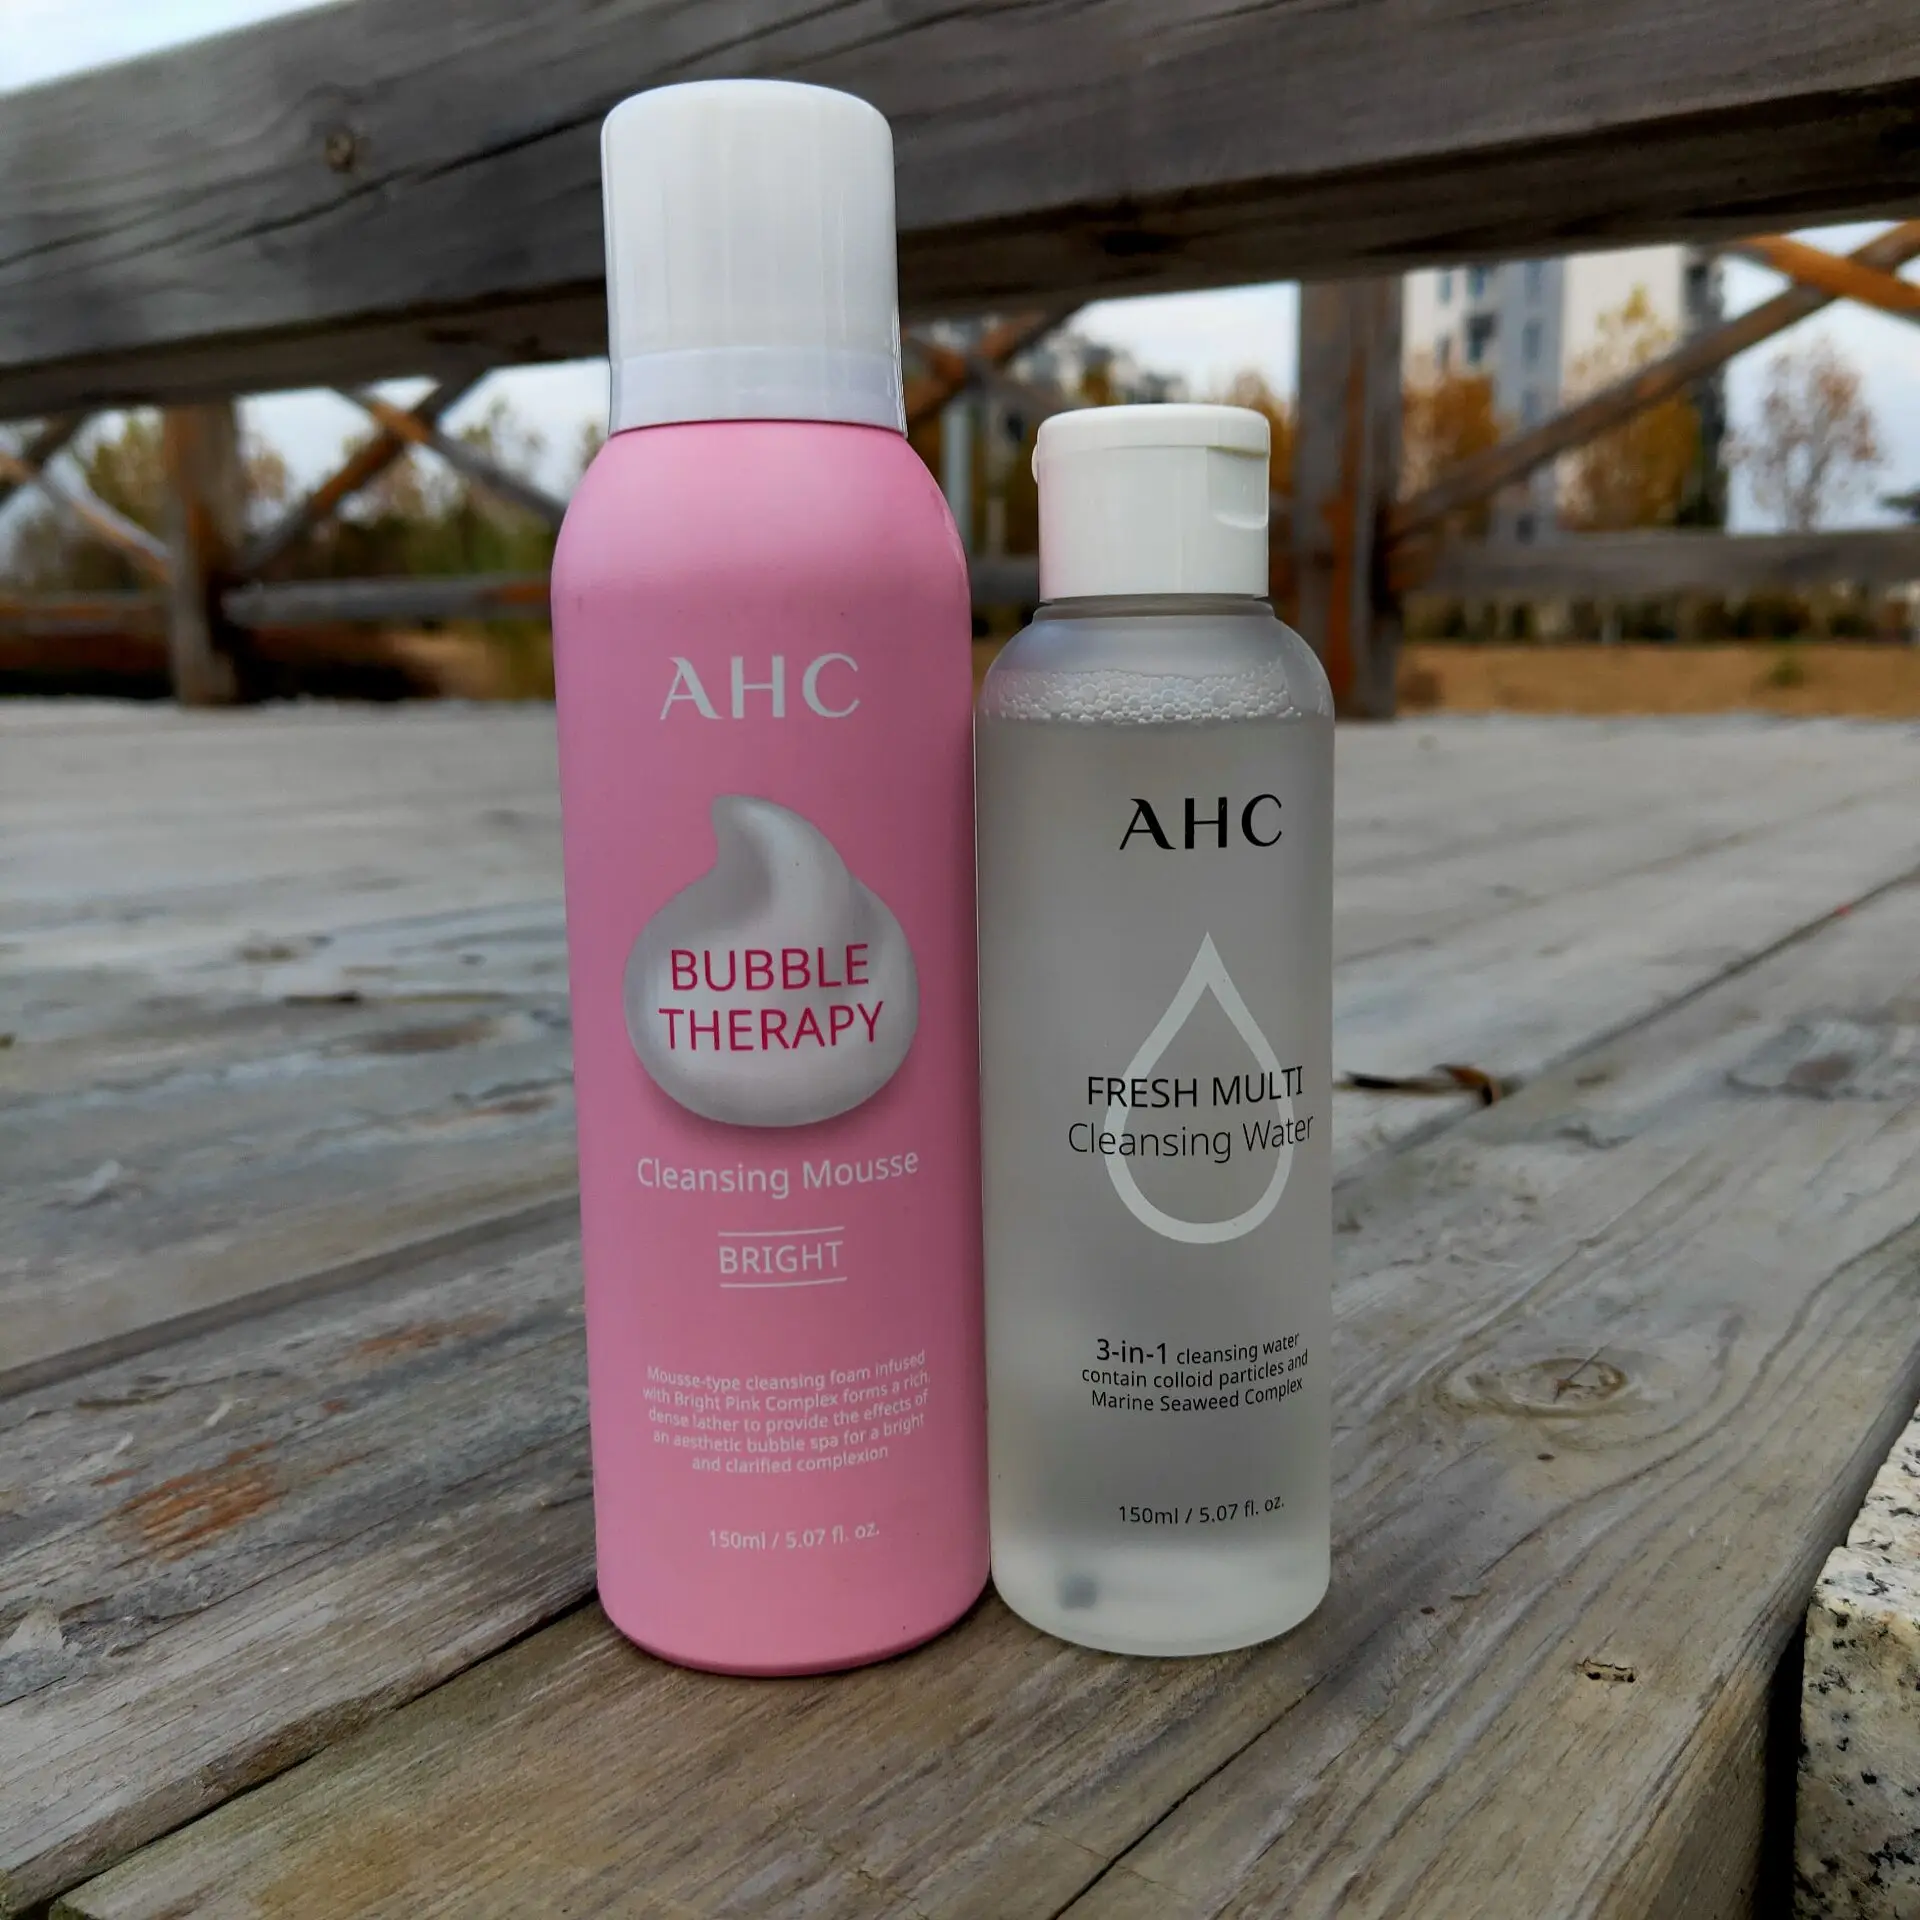 

AHC BUBBLE THERAPY CLEANSING MOUSSE foam 150ML+ FRESH MULTI CCEANSING WATER 150ML brightening skin Face Cleaning set